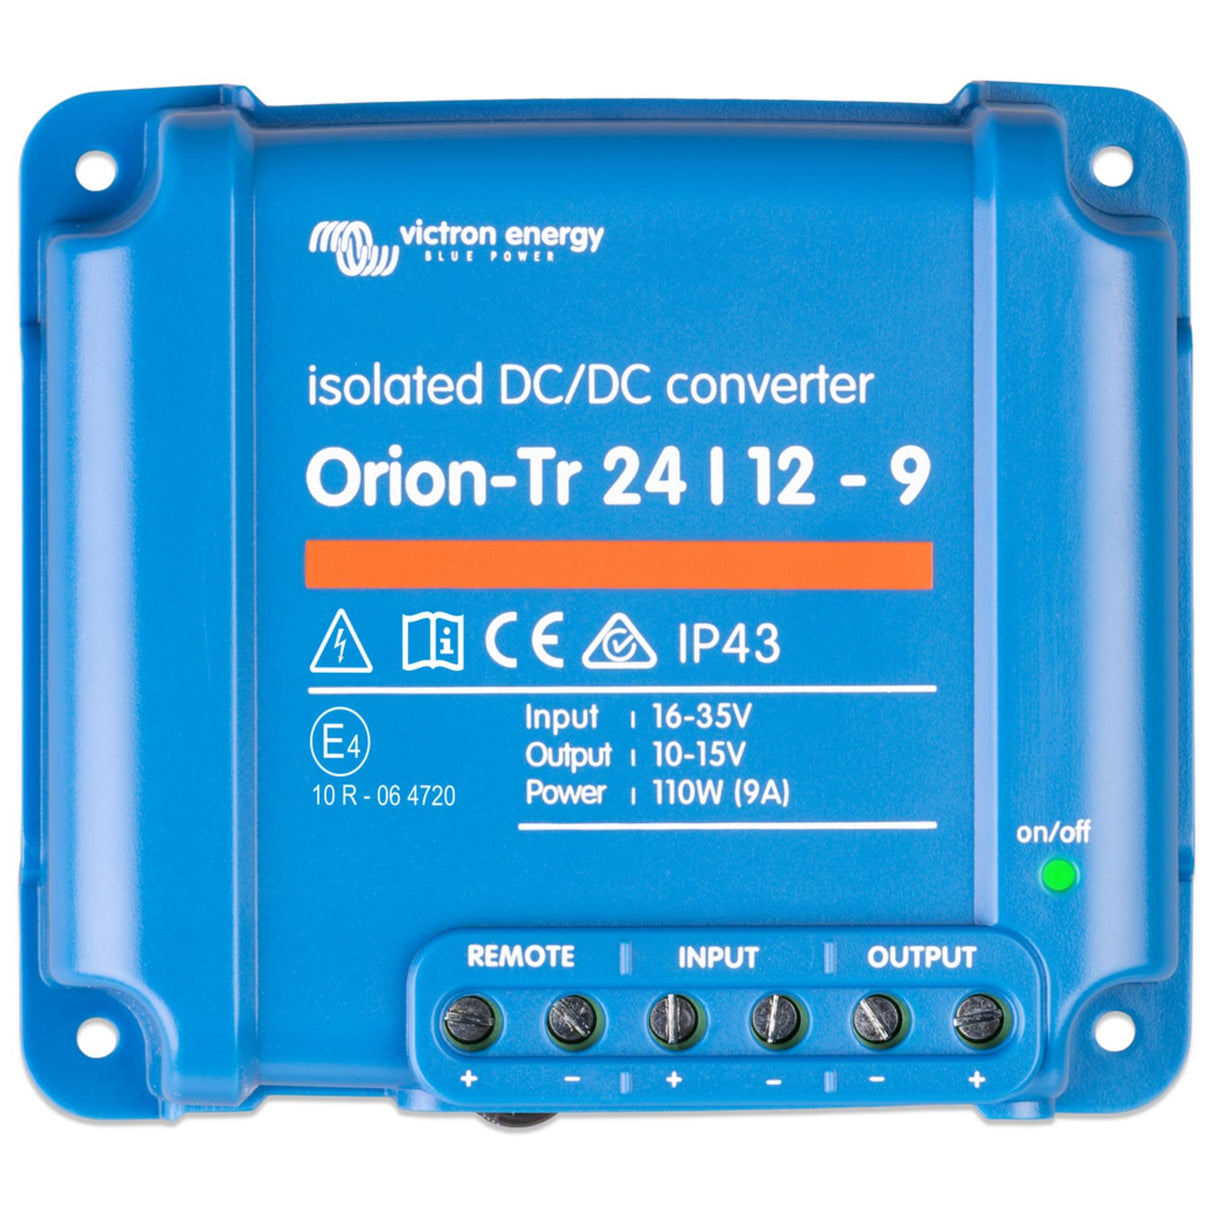 Victron Orion-Tr DC-DC Converter-Isolated 24/12-9A 110W